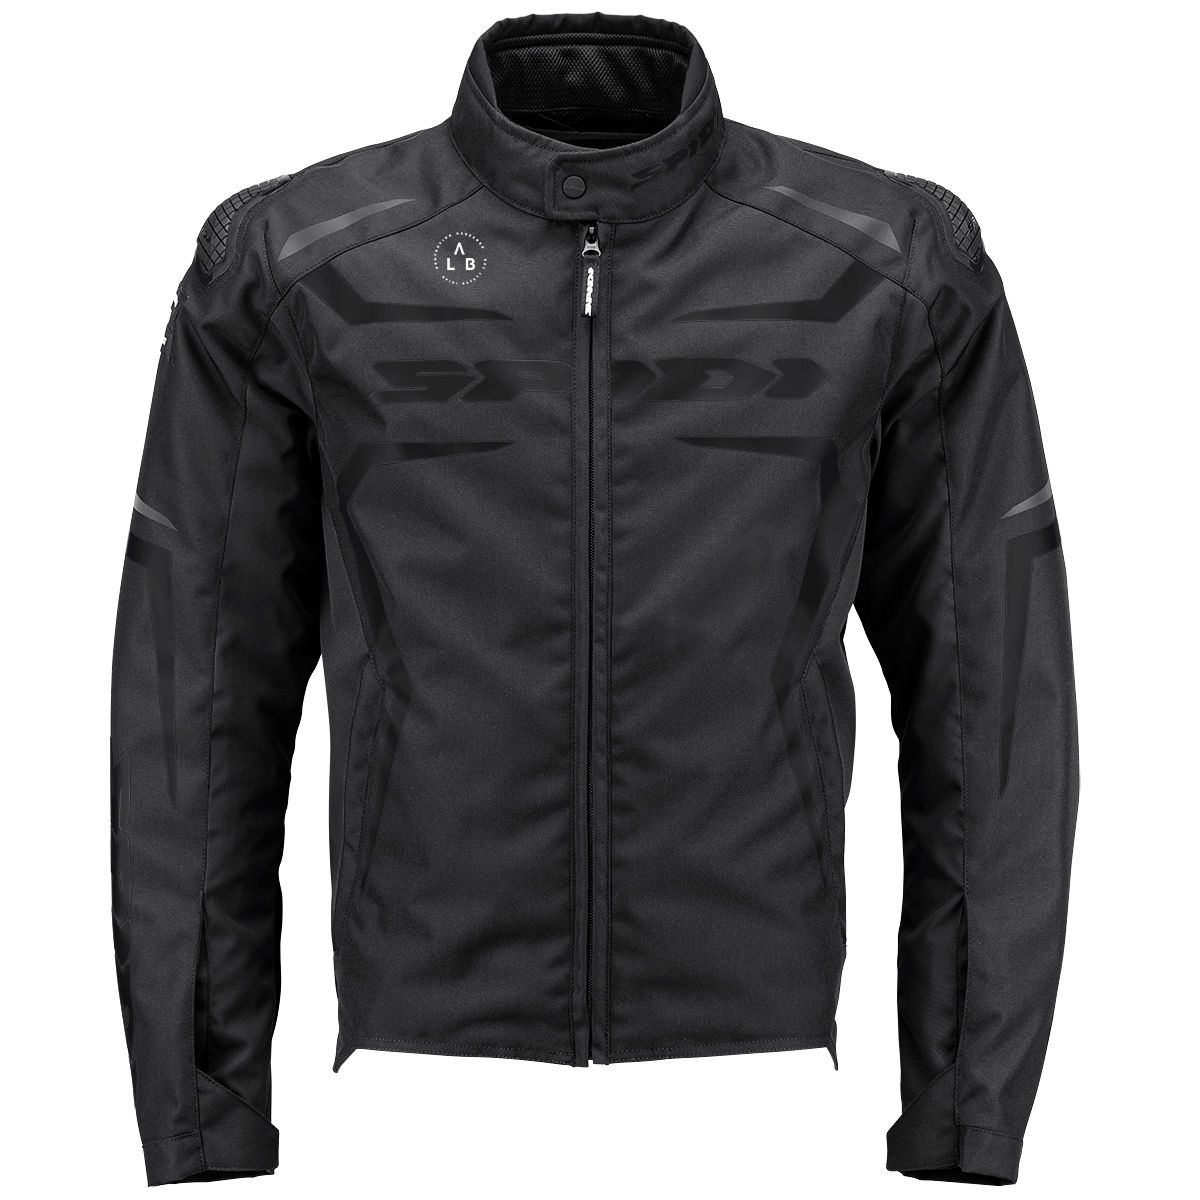 Image of Spidi Race-Evo H2Out Jacket Black Size 5XL ID 8030161460421